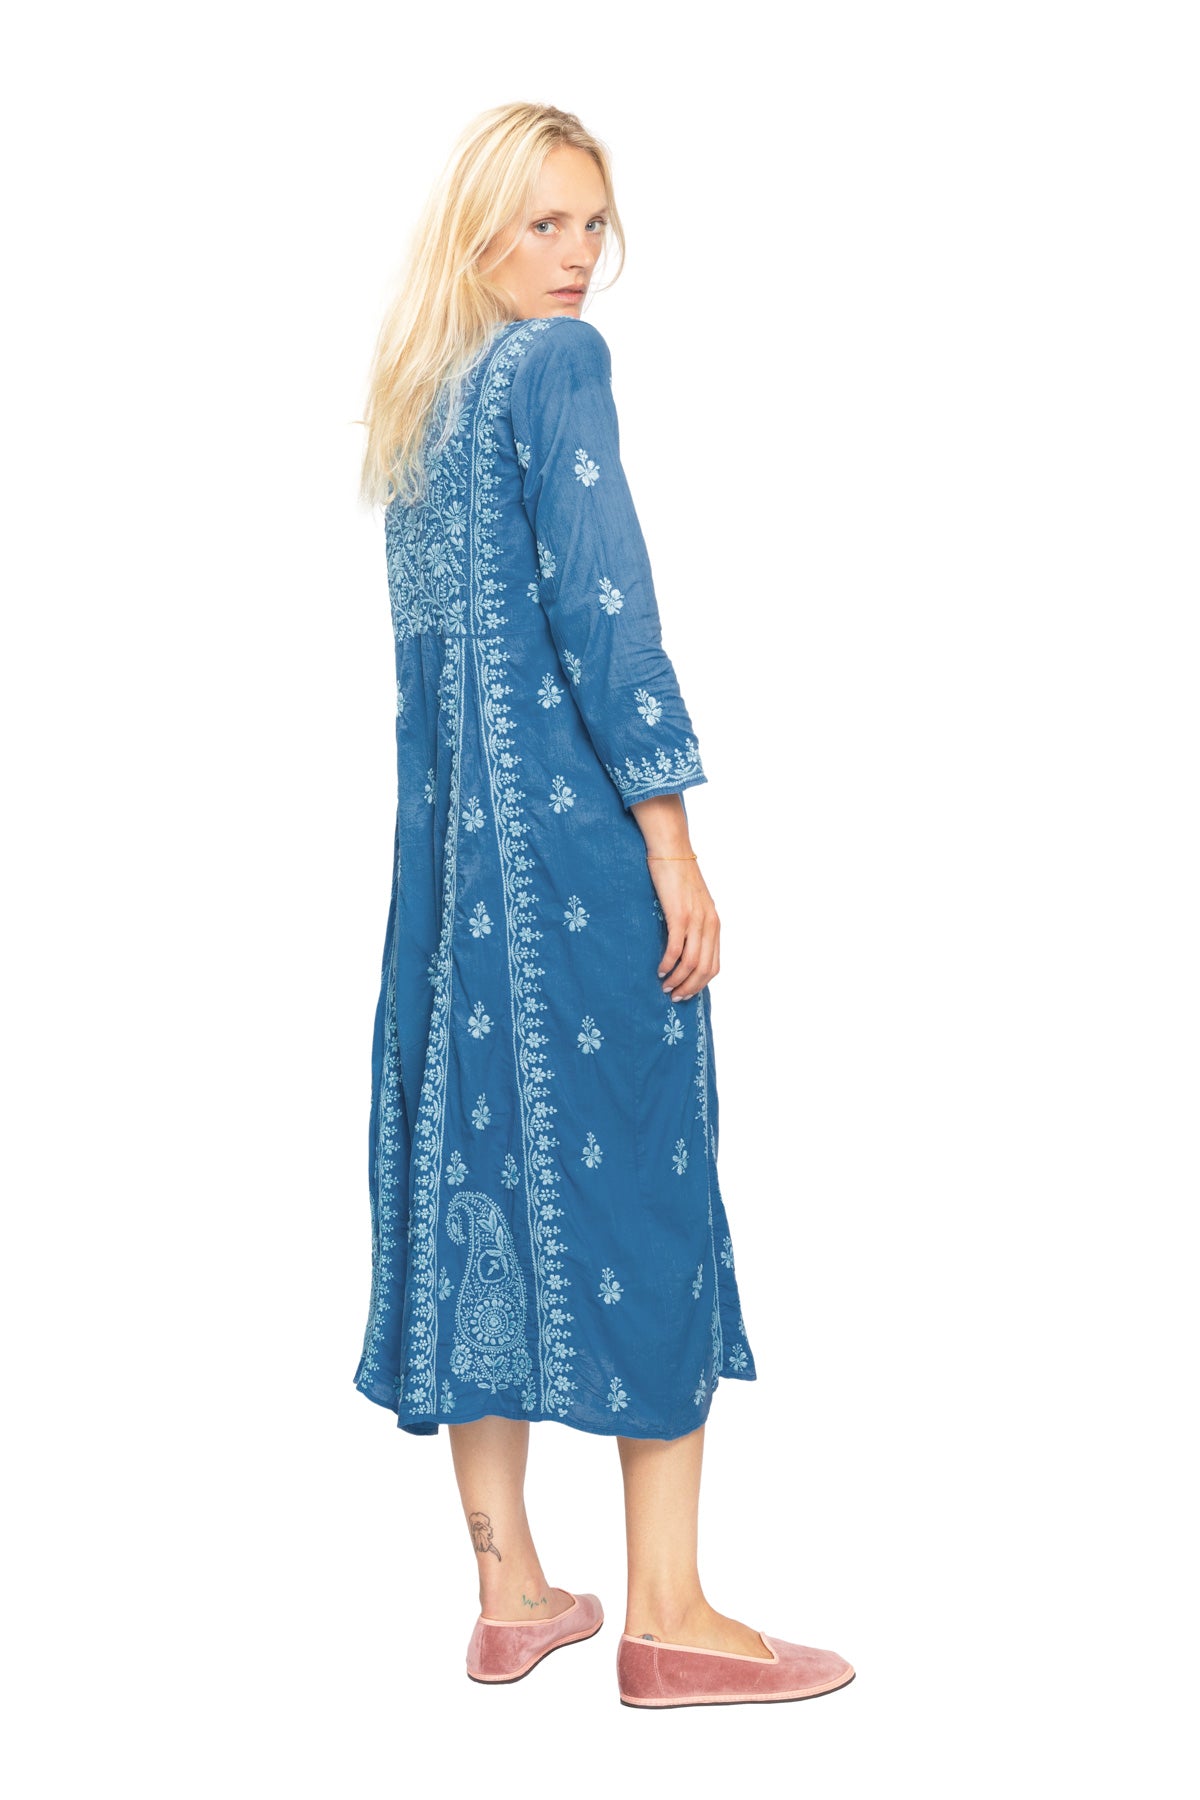 Cotton Embroidered Dress - Ocean Blue